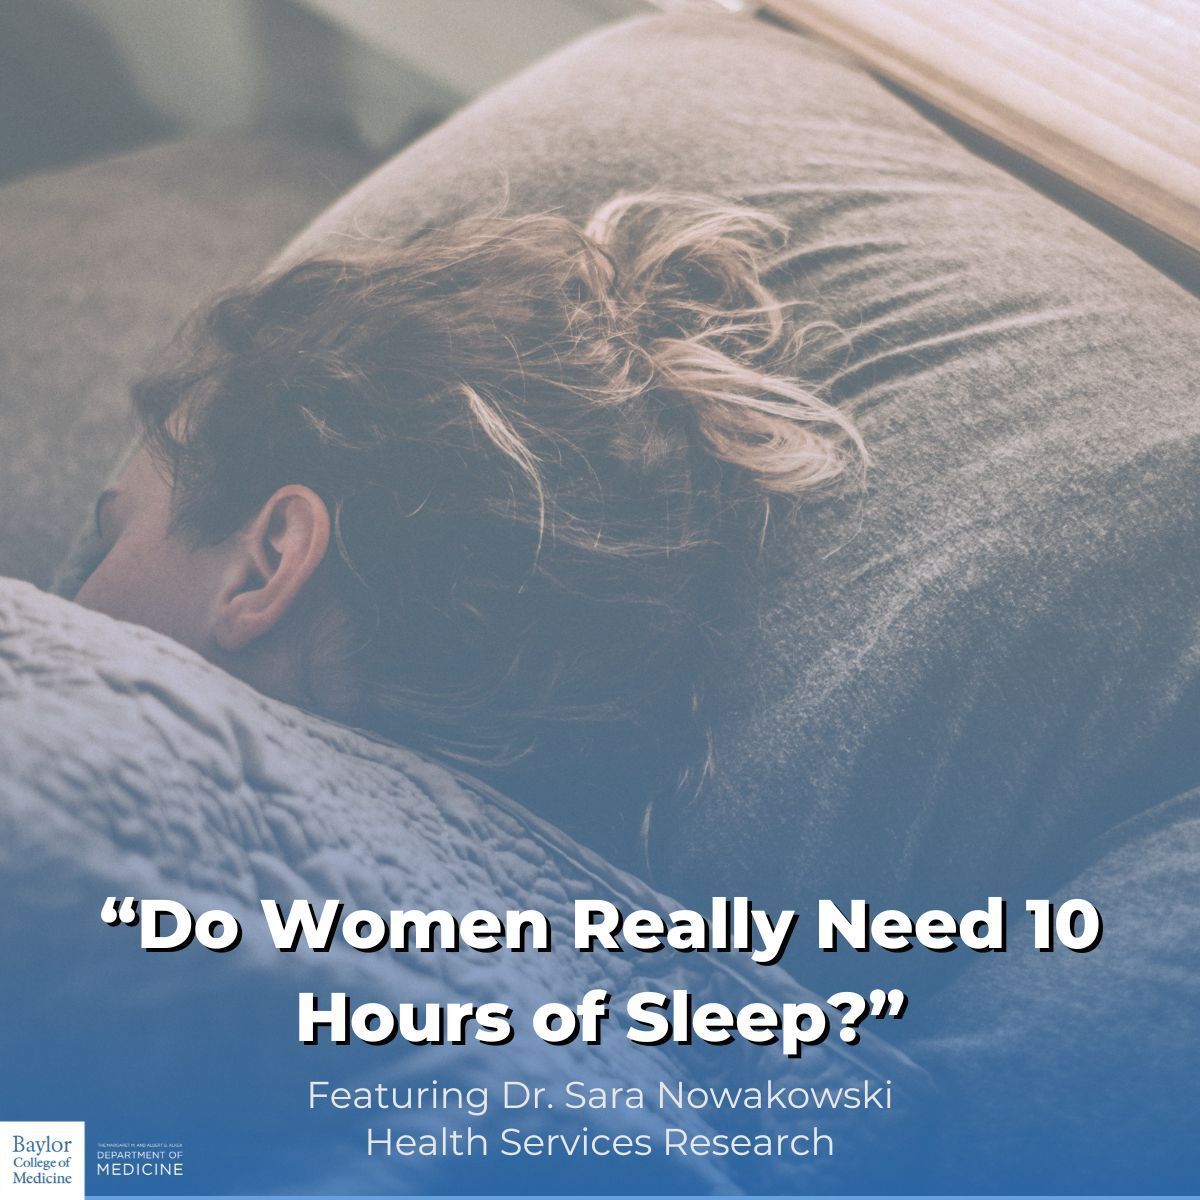 Dr. Sara Nowakowski sheds light on the myth that women need drastically more sleep than men. Research shows a mere 10-15 minute difference, emphasizing individual sleep needs over gender norms. 💤 #BCMDoM Read more: buff.ly/3y7zLlb